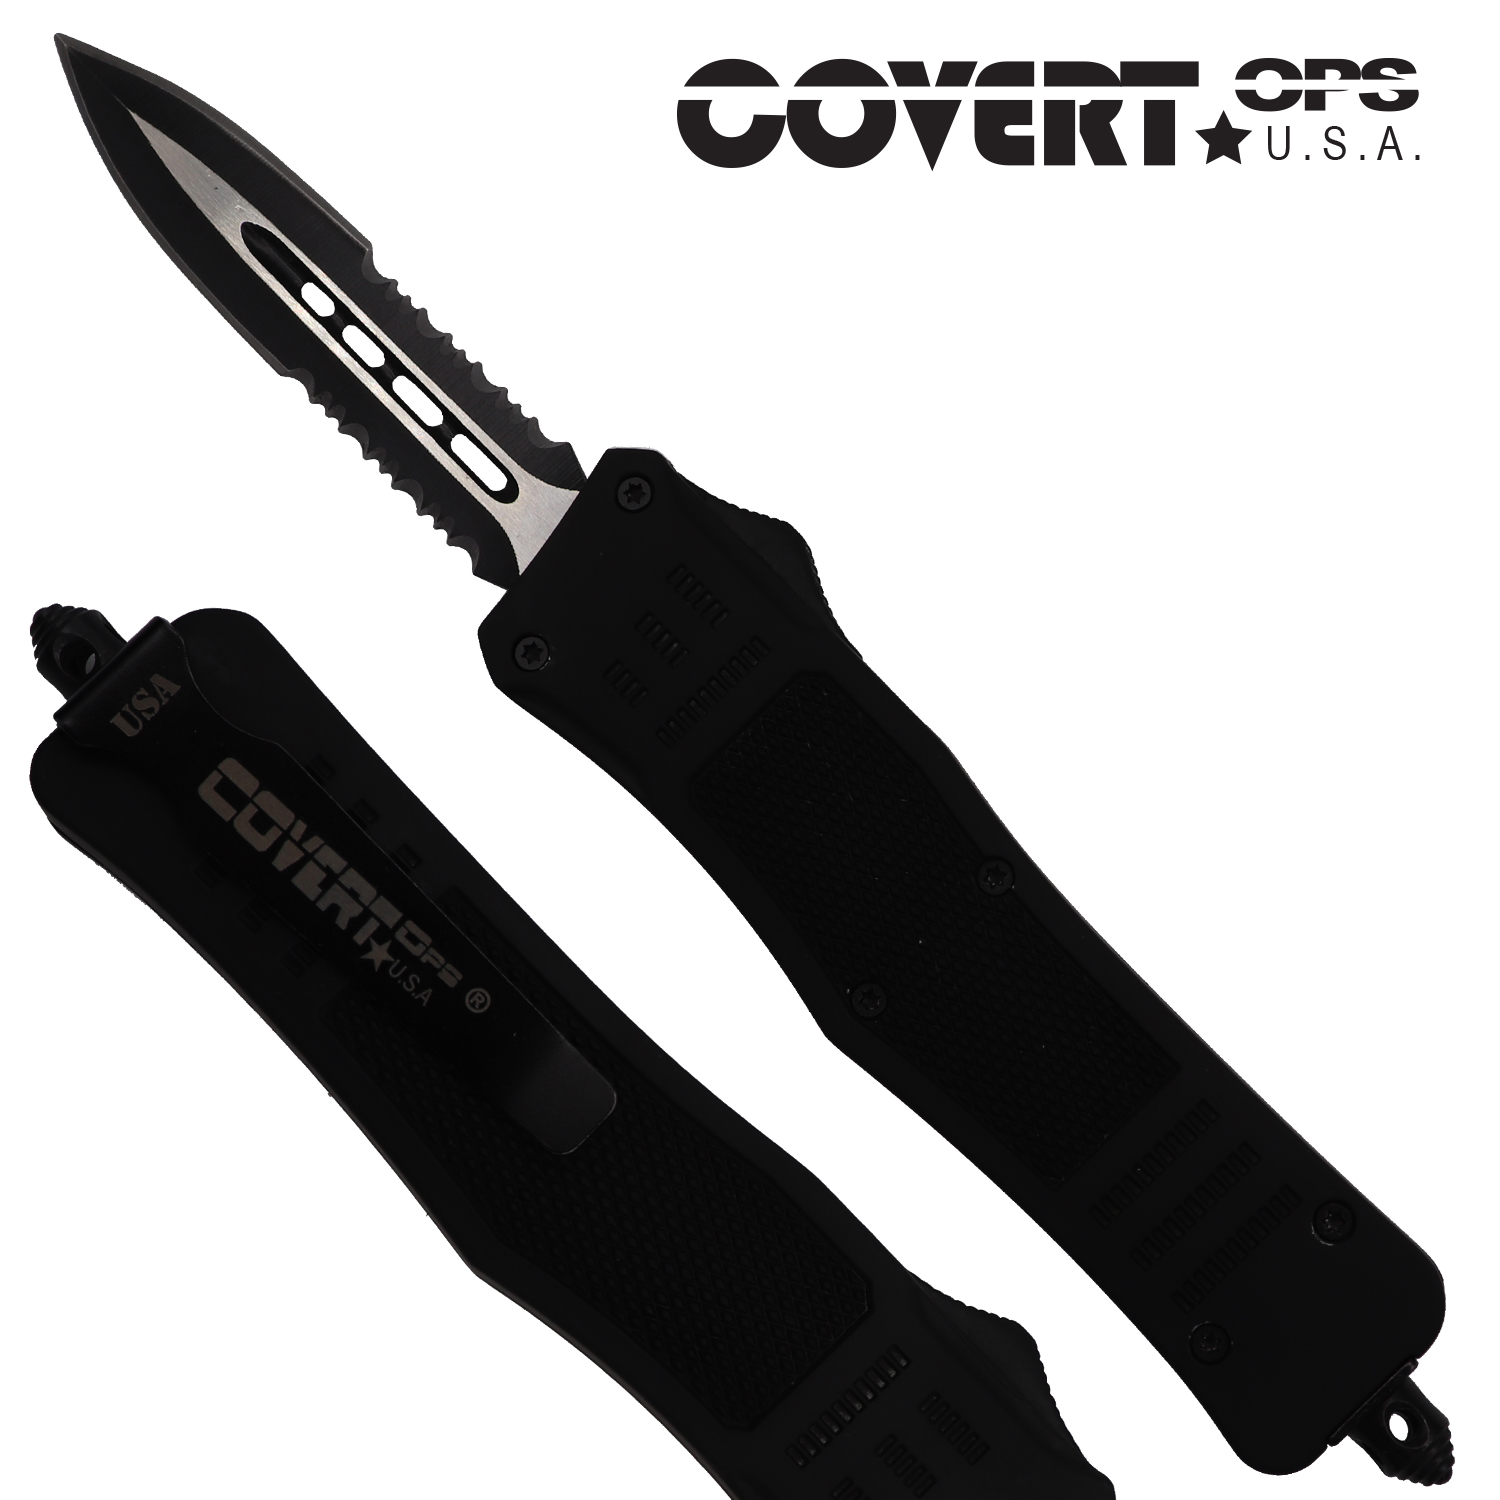 Covert OPS USA OTF Automatic Knife 8 inch overall Black Handle Two Tone Double Edge D2 Steel Blade